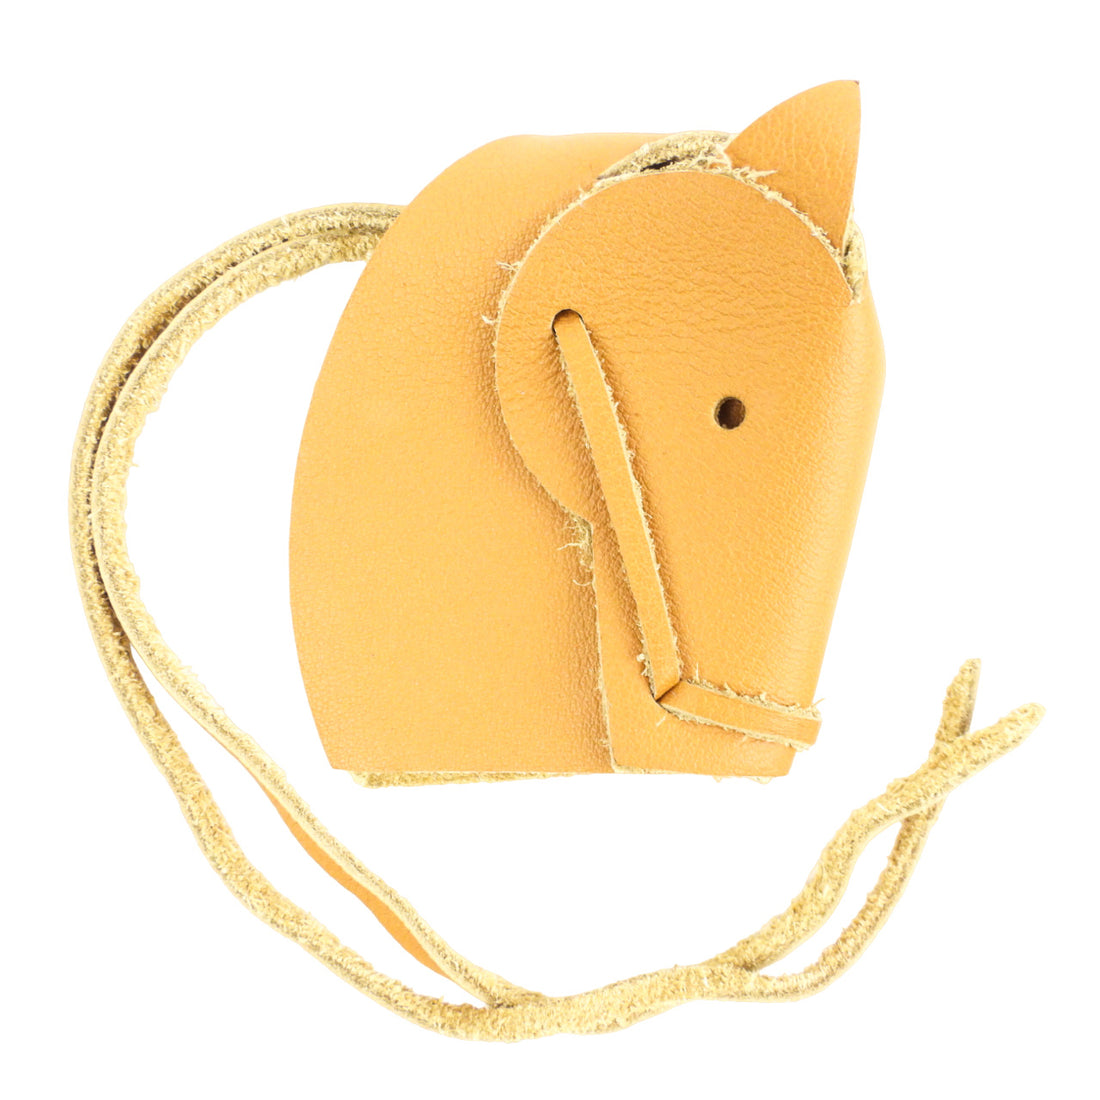 Hermes Tete de Cheval Tan Swift Leather Origami Horse Head Charm – I MISS  YOU VINTAGE